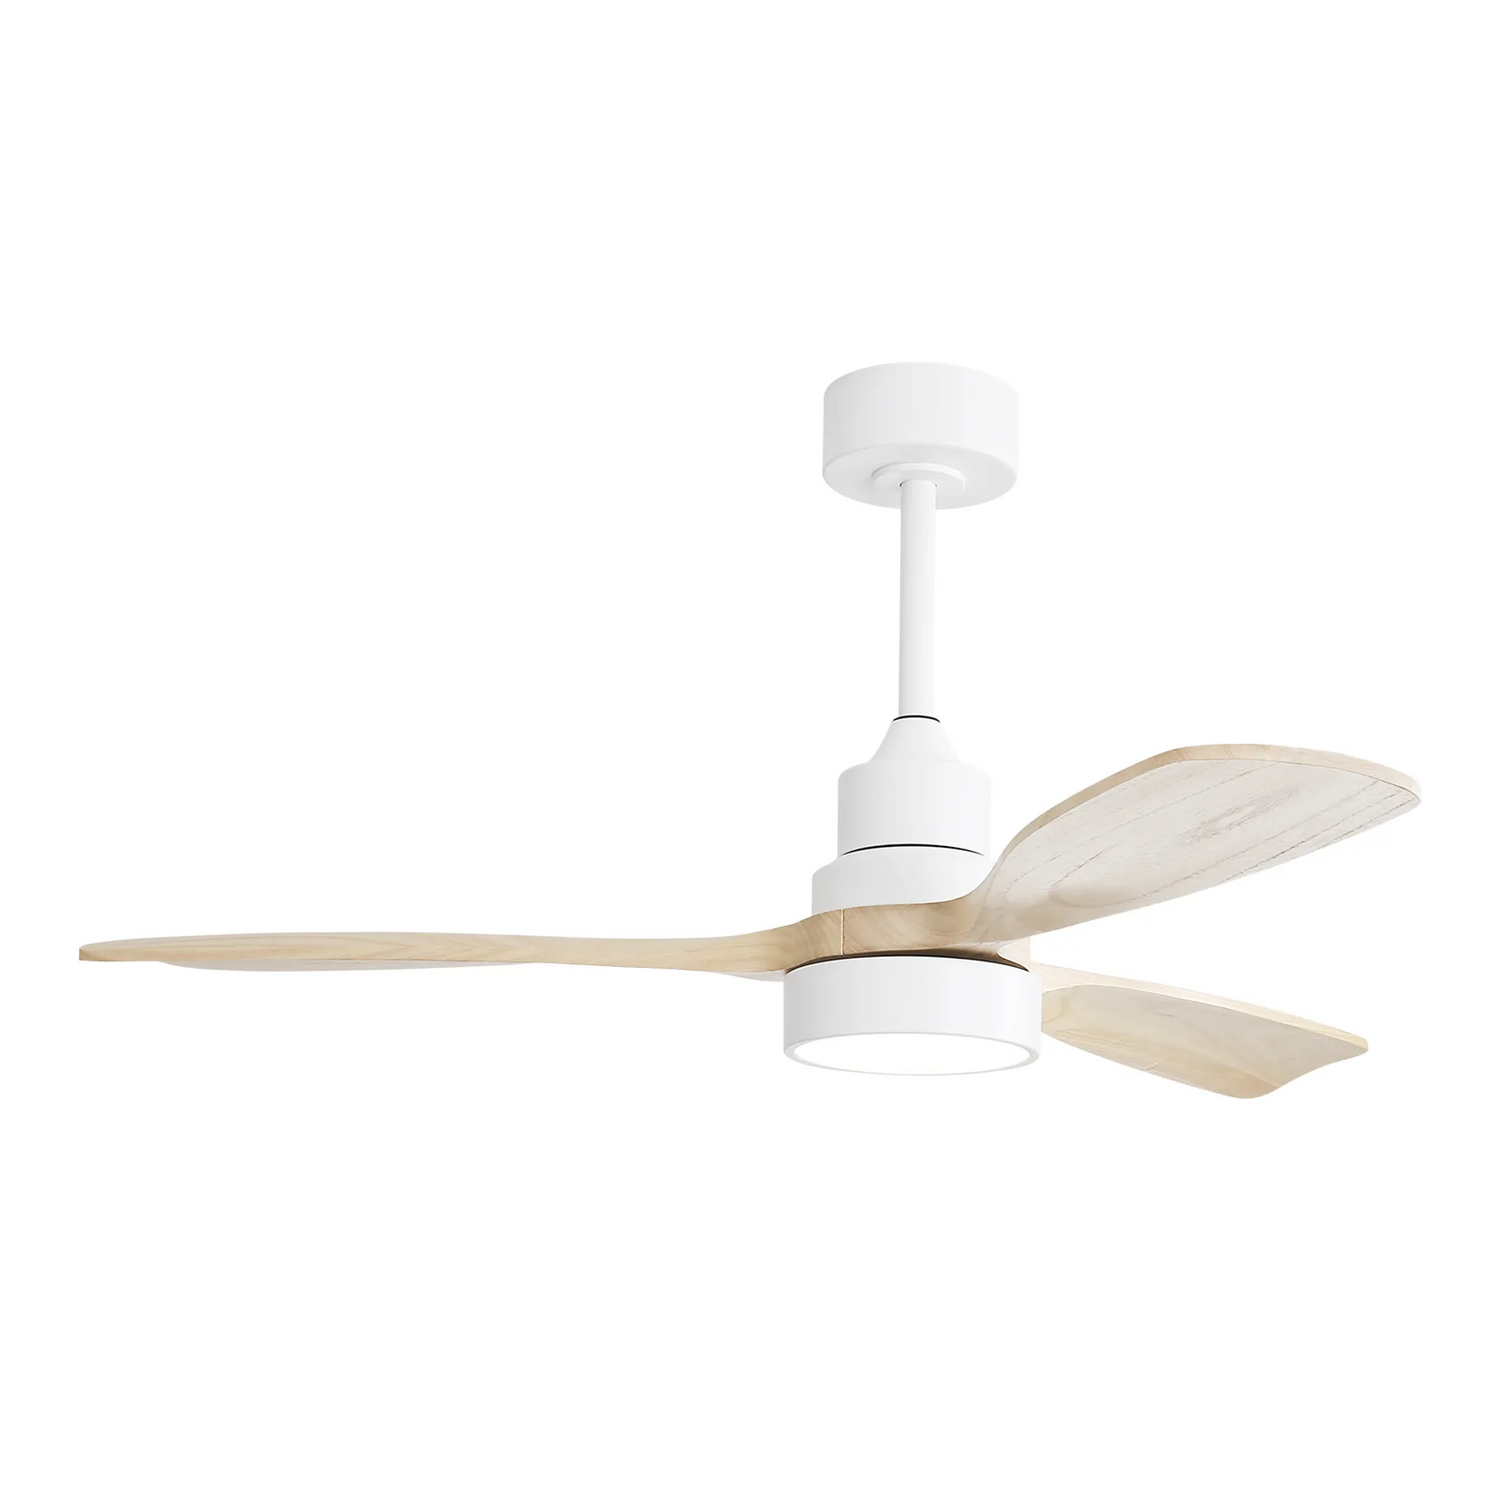 KBS White and wood blade DC ceiling fans